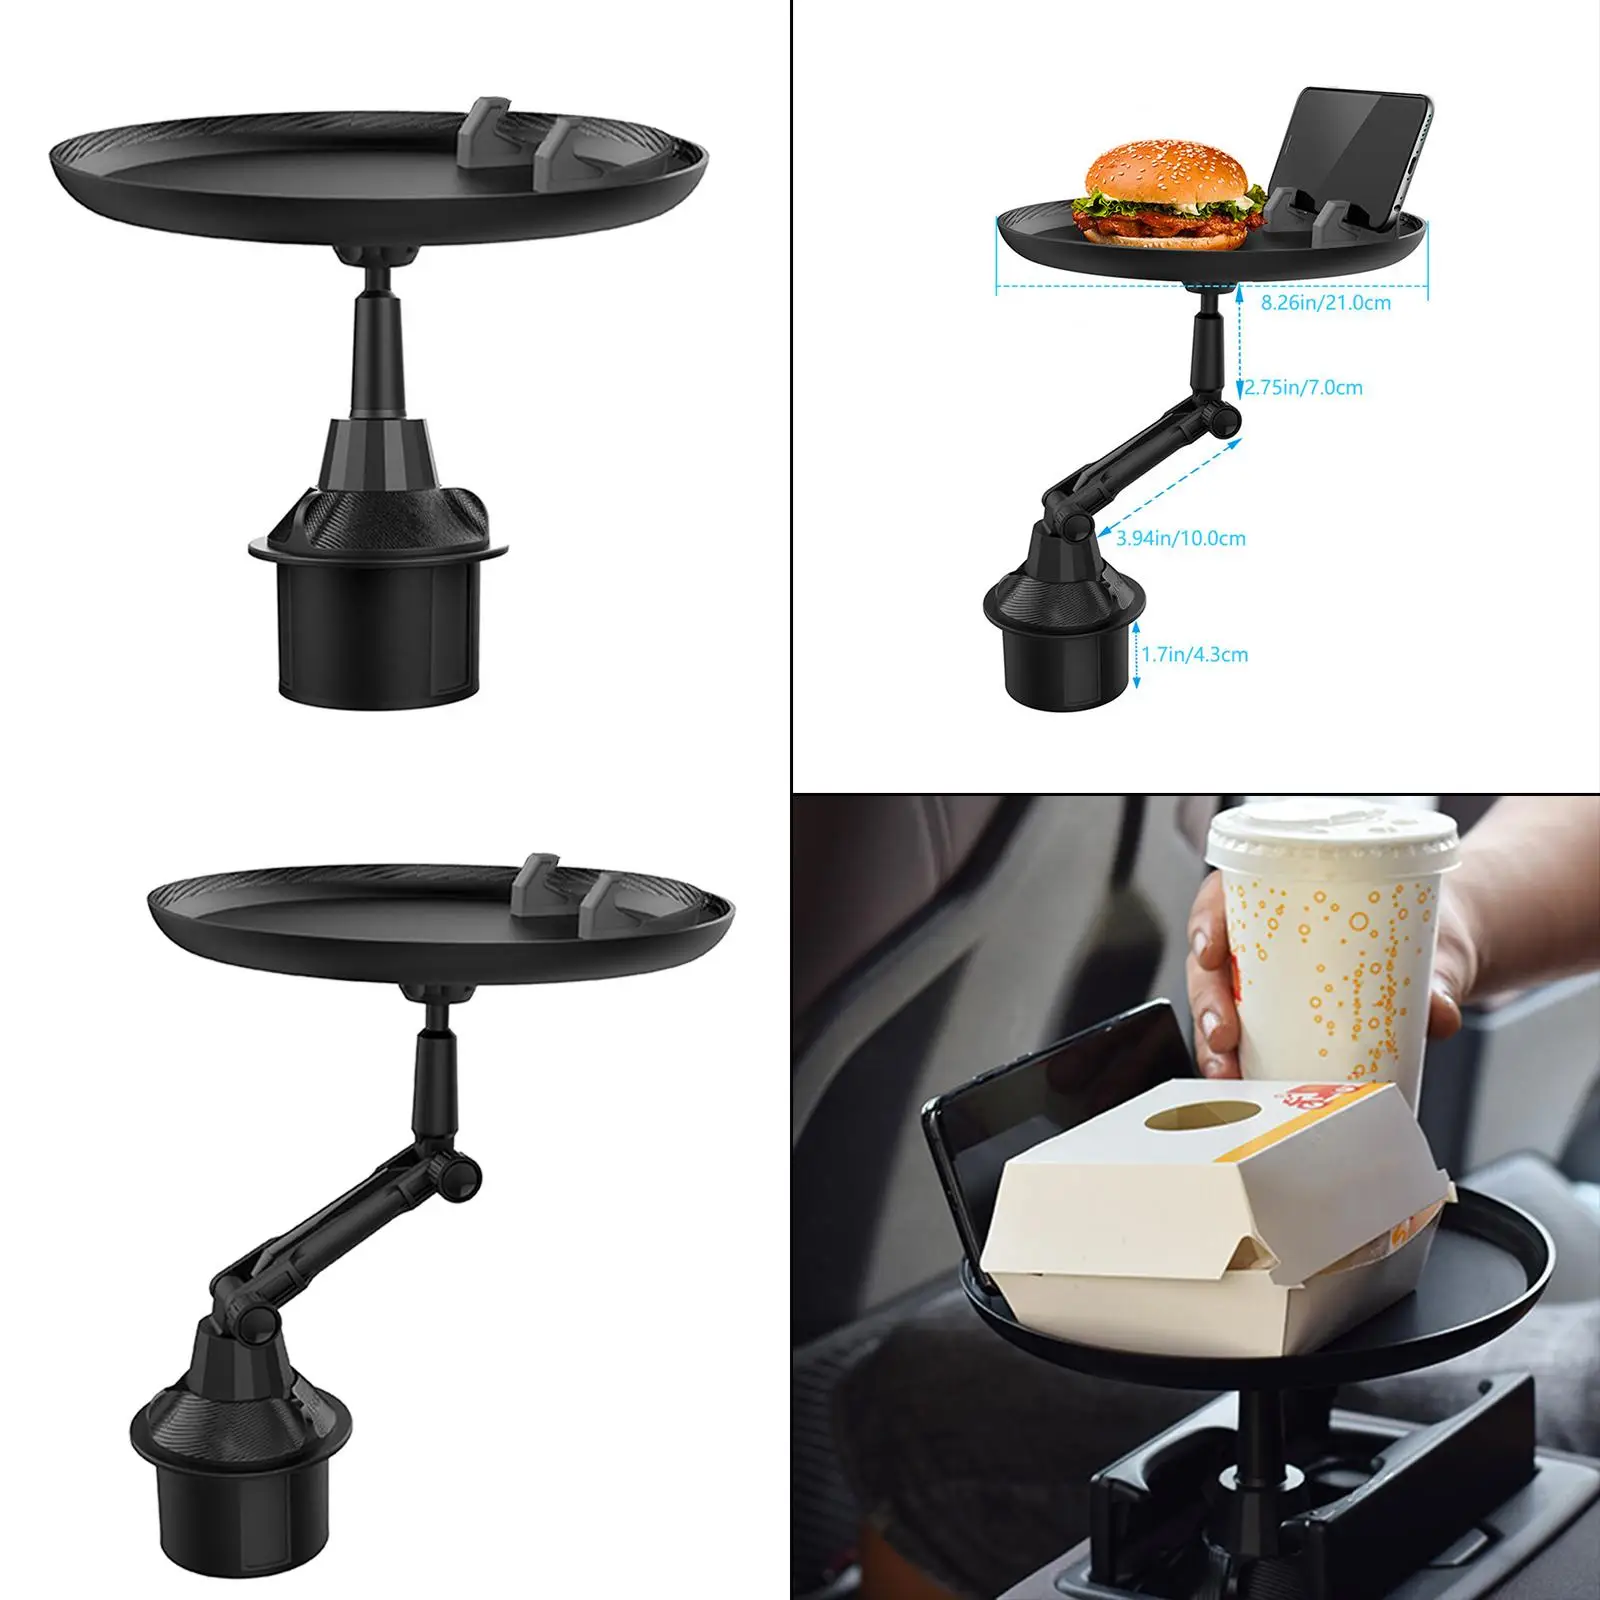  Holder Phone Slot Non Slip  Eating Drink Beverage Snacks Coffee Bottle Table Stand Mount Organizer Accessories